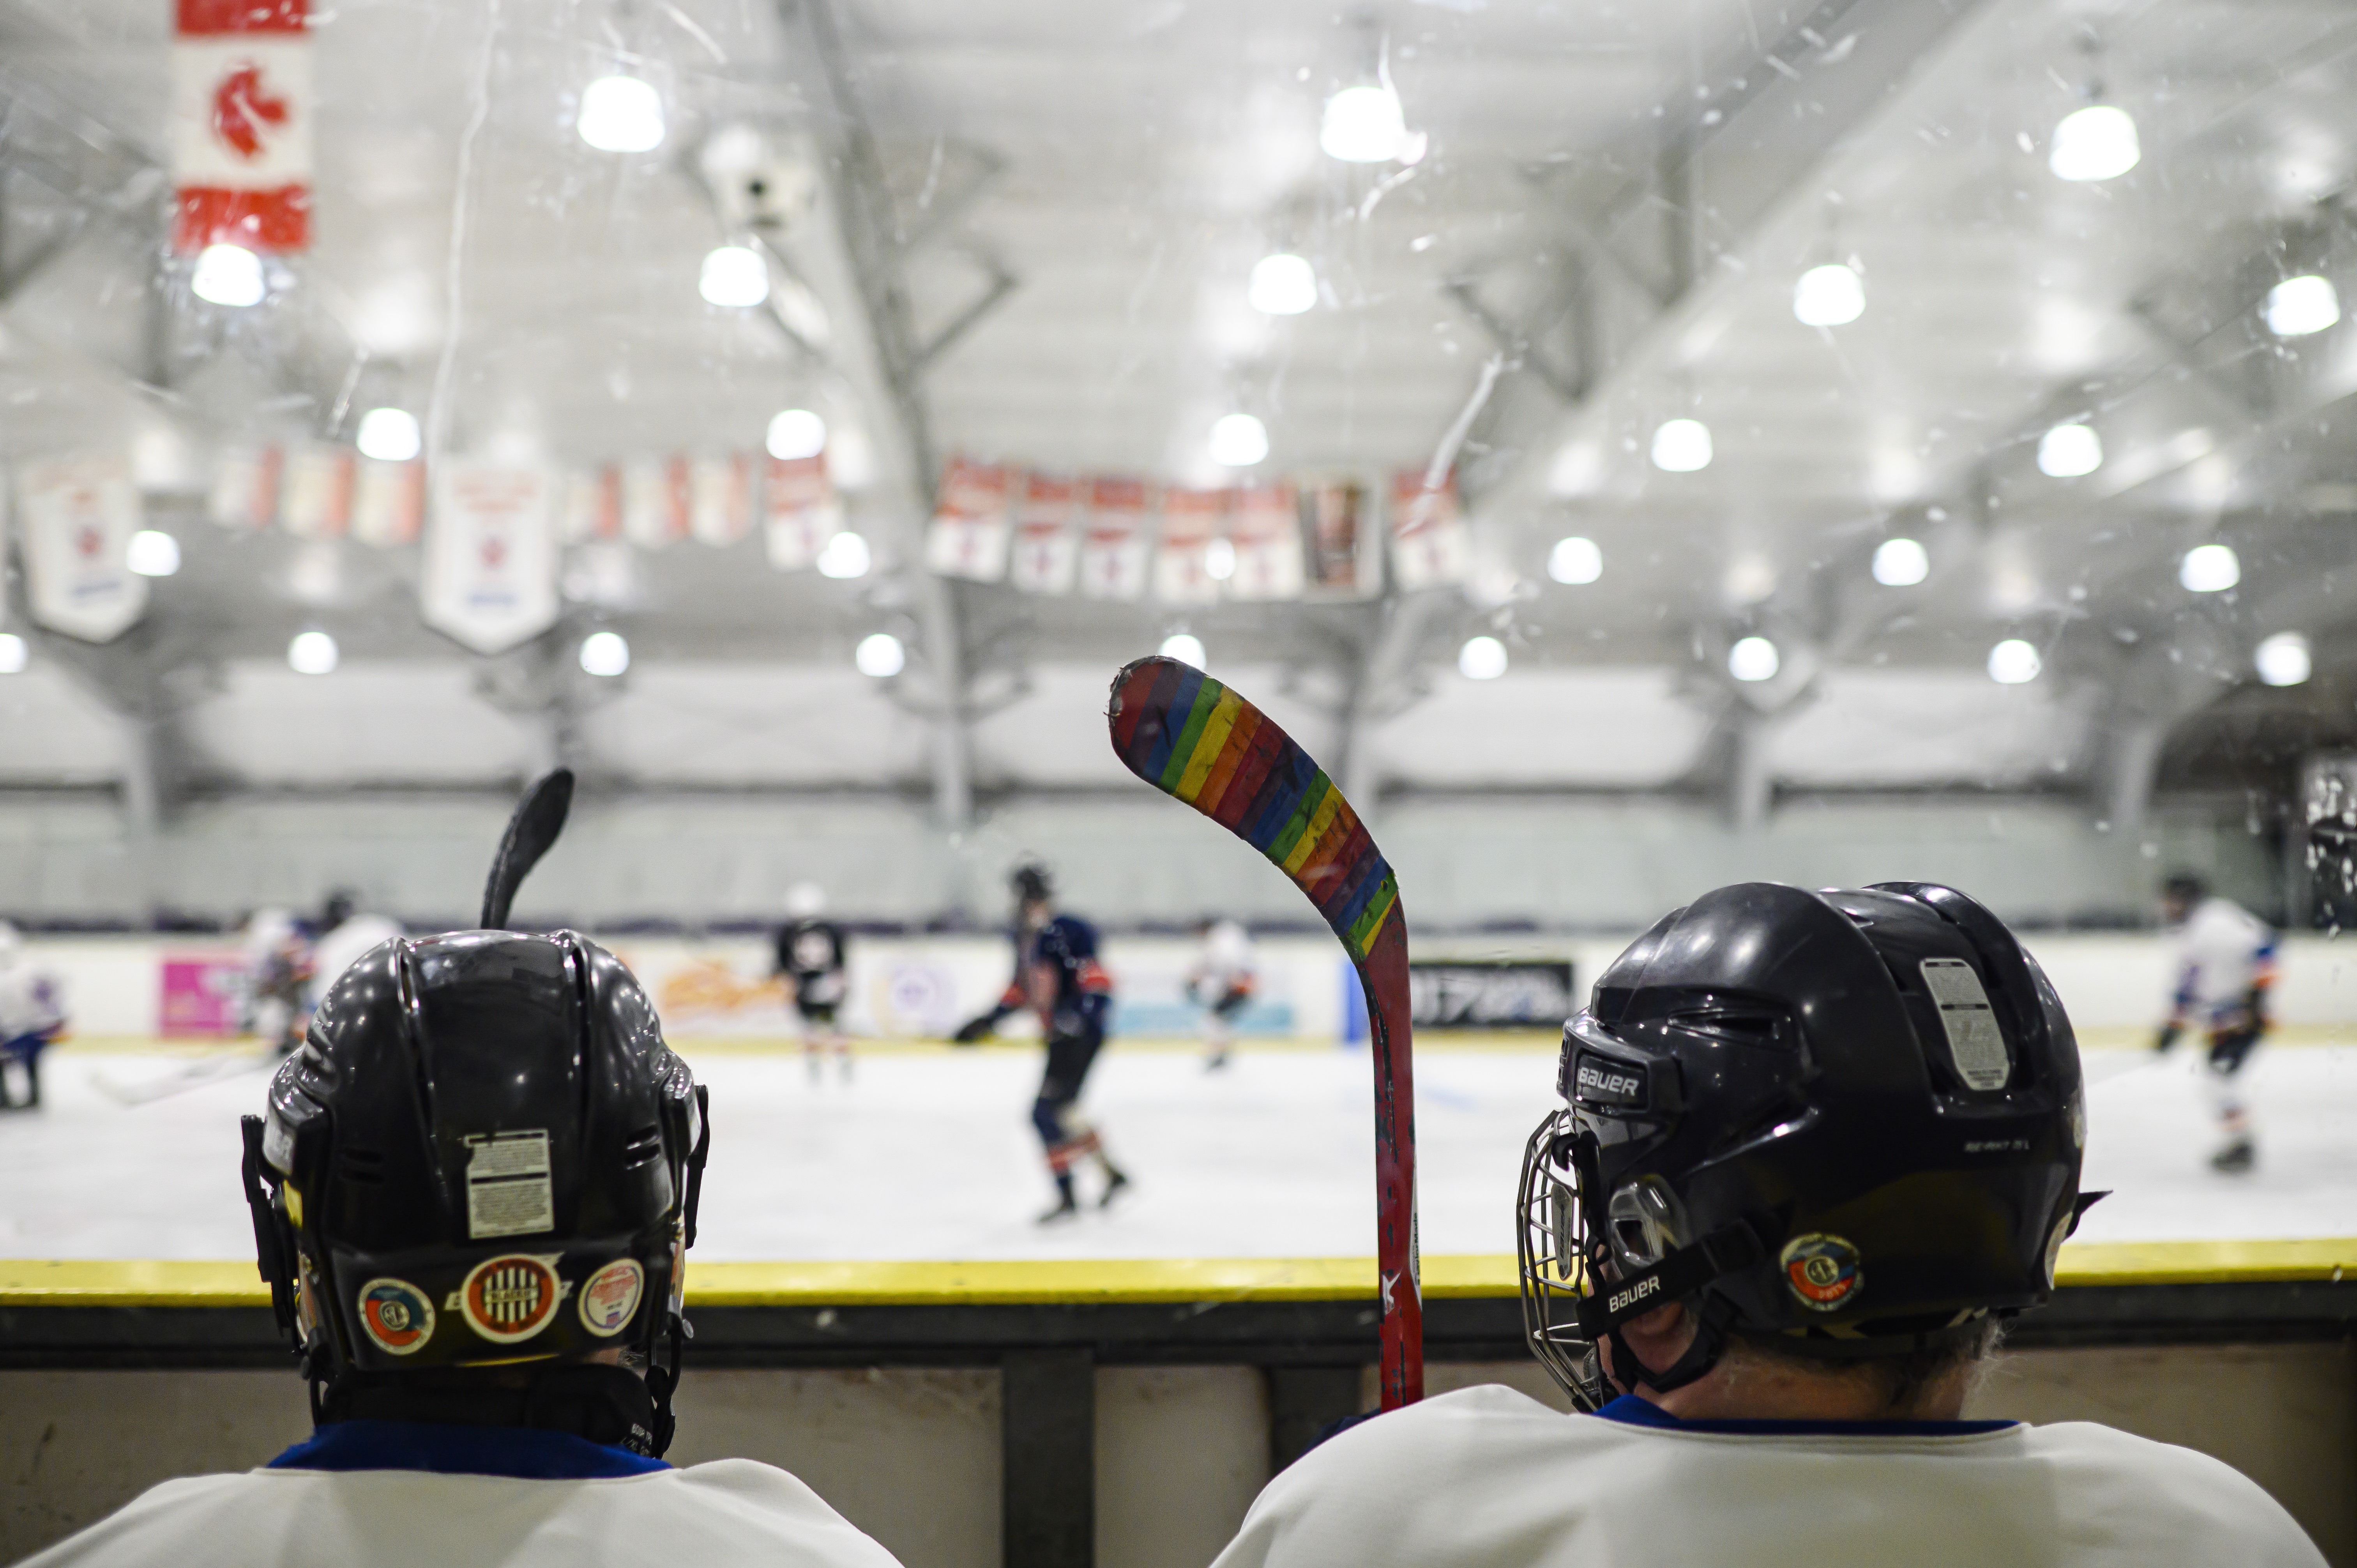 As hockeys toxic culture faces a reckoning, those who love the sport push for change pic